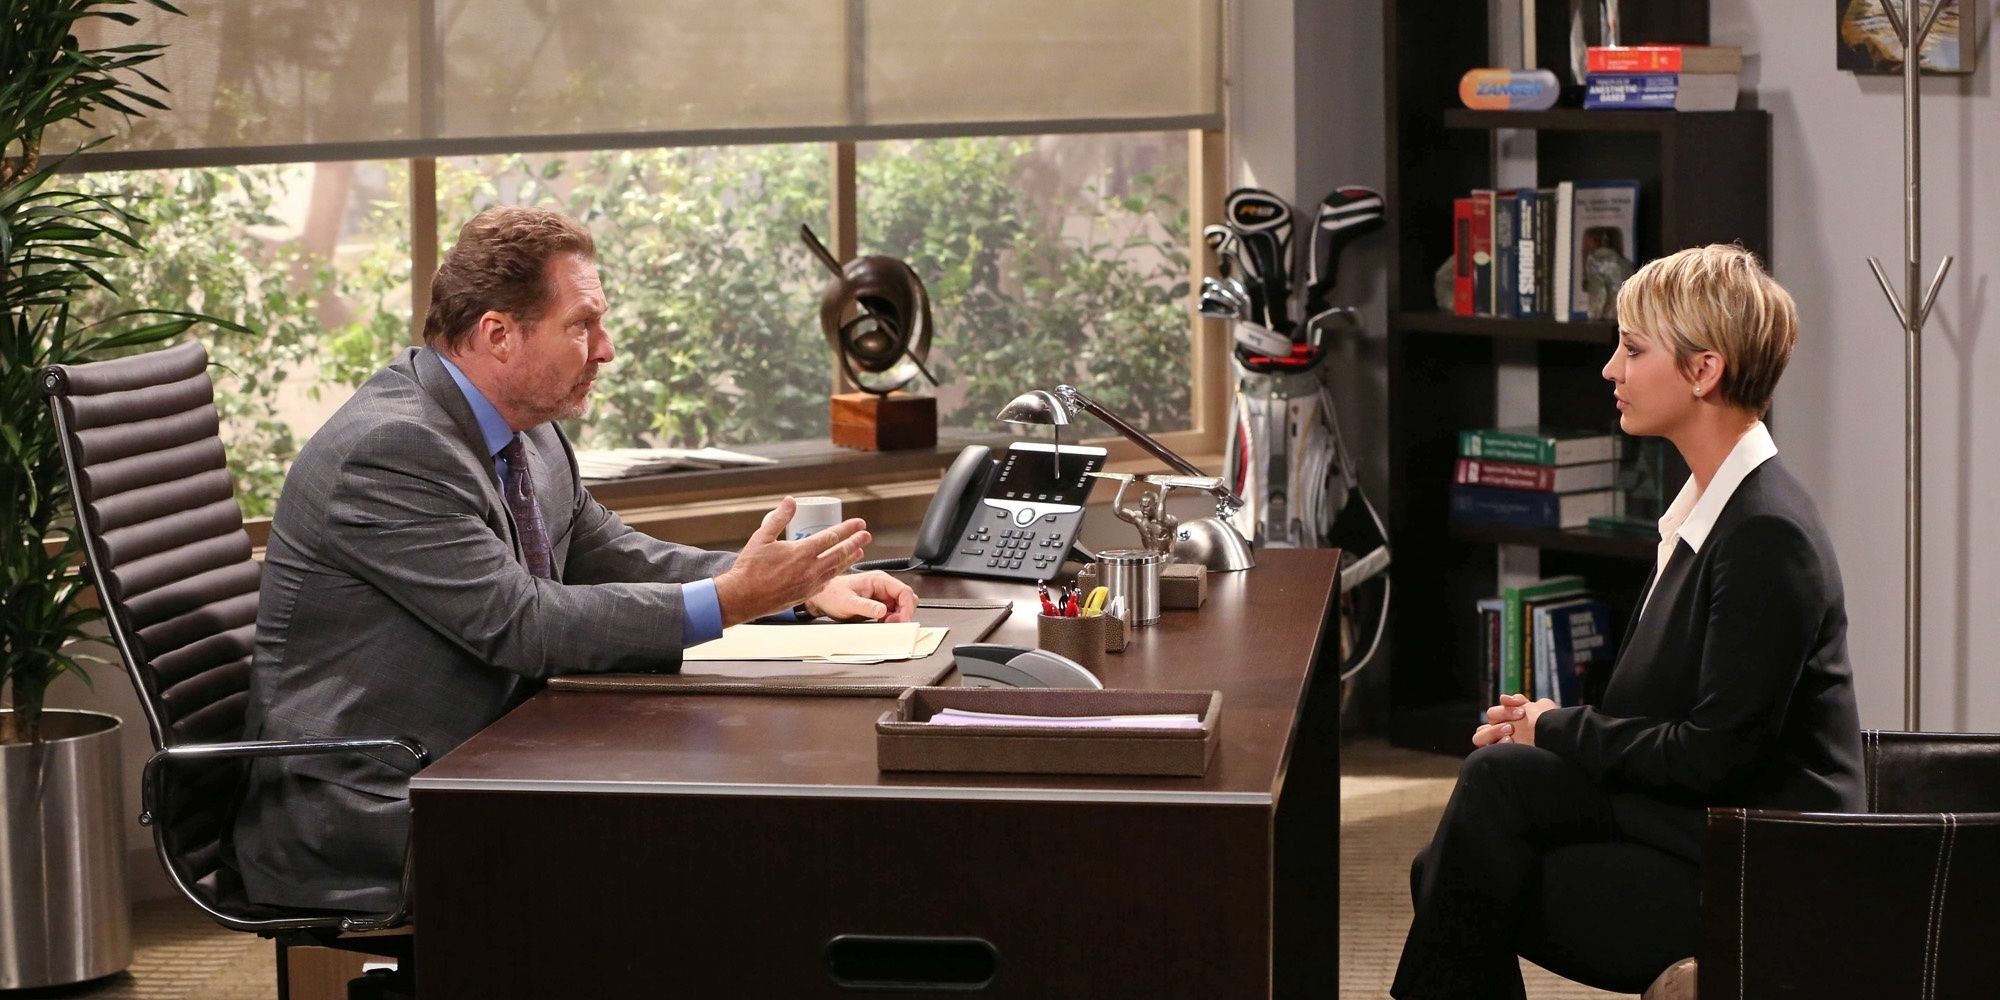 Penny interviews for a job with a new boss on The Big Bang Theory 